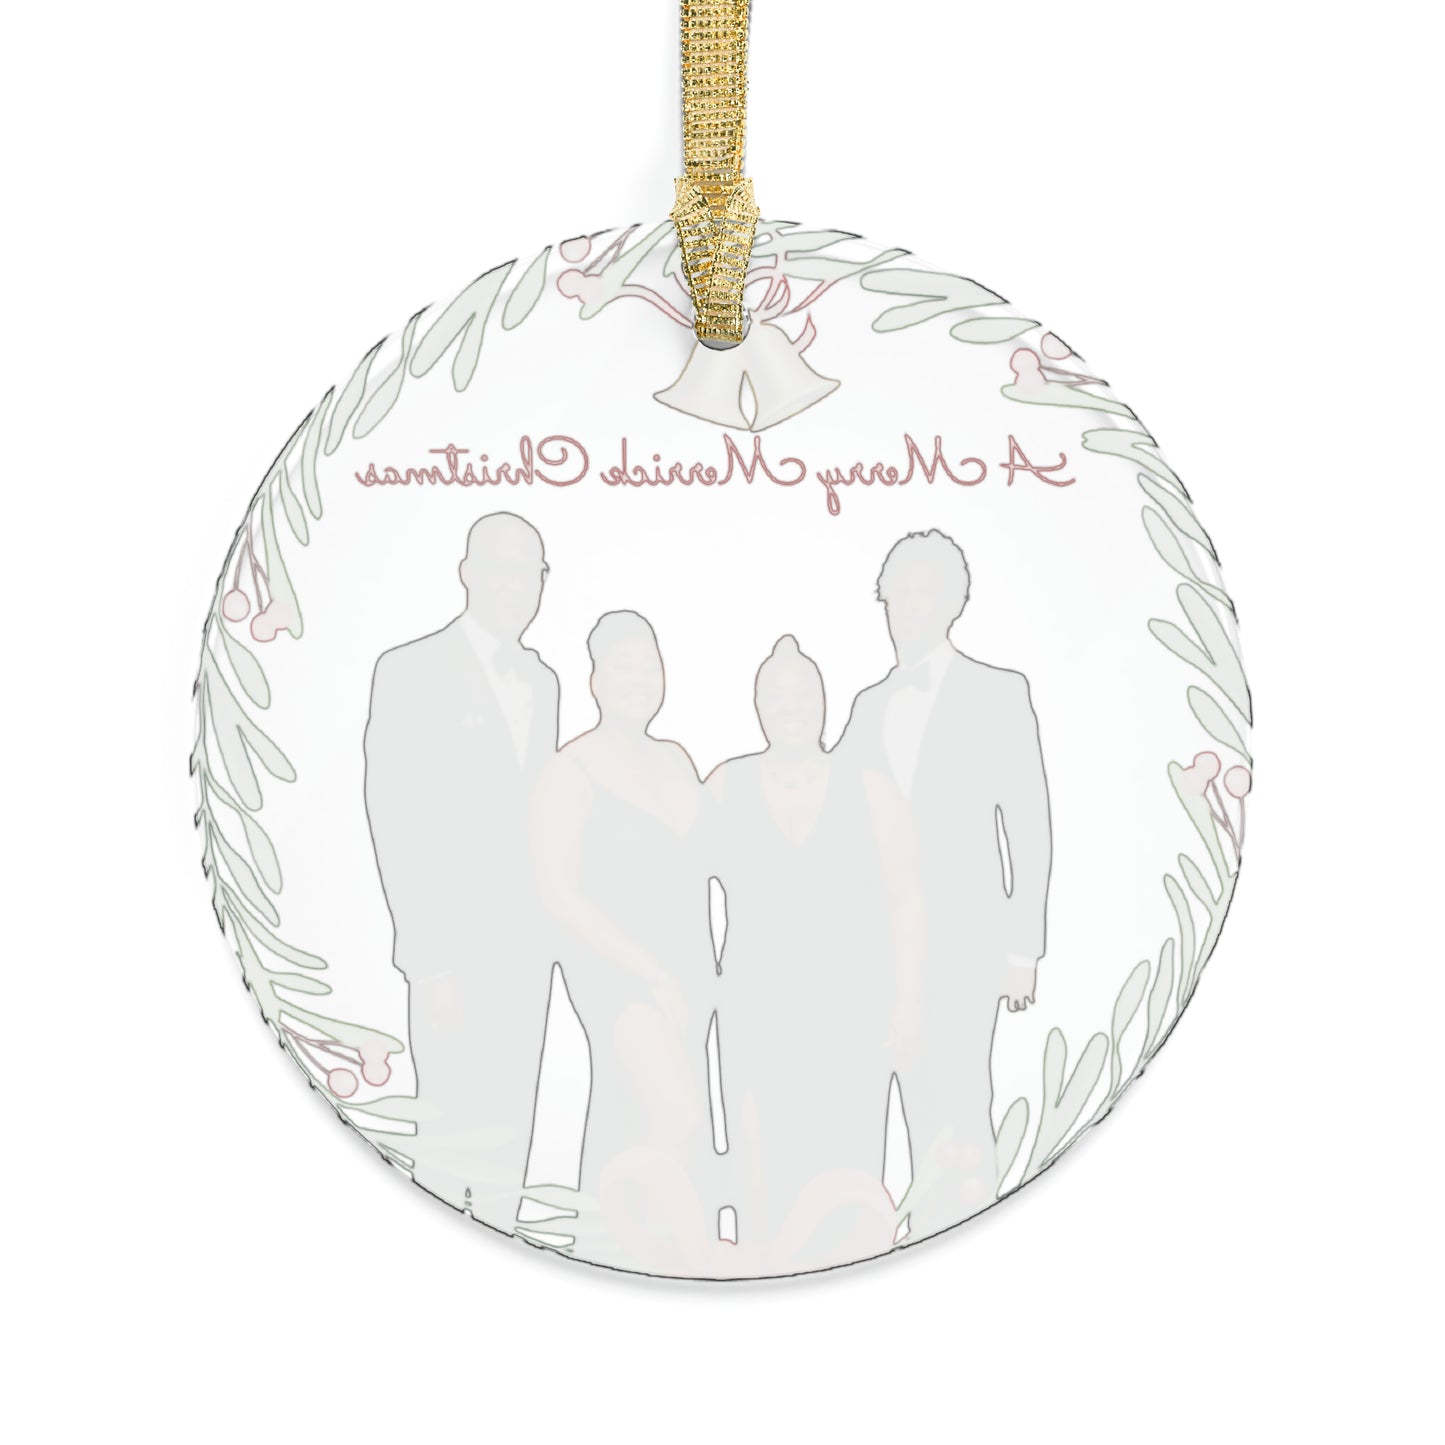 A Merry Merrick Christmas | Personalized Acrylic Ornaments